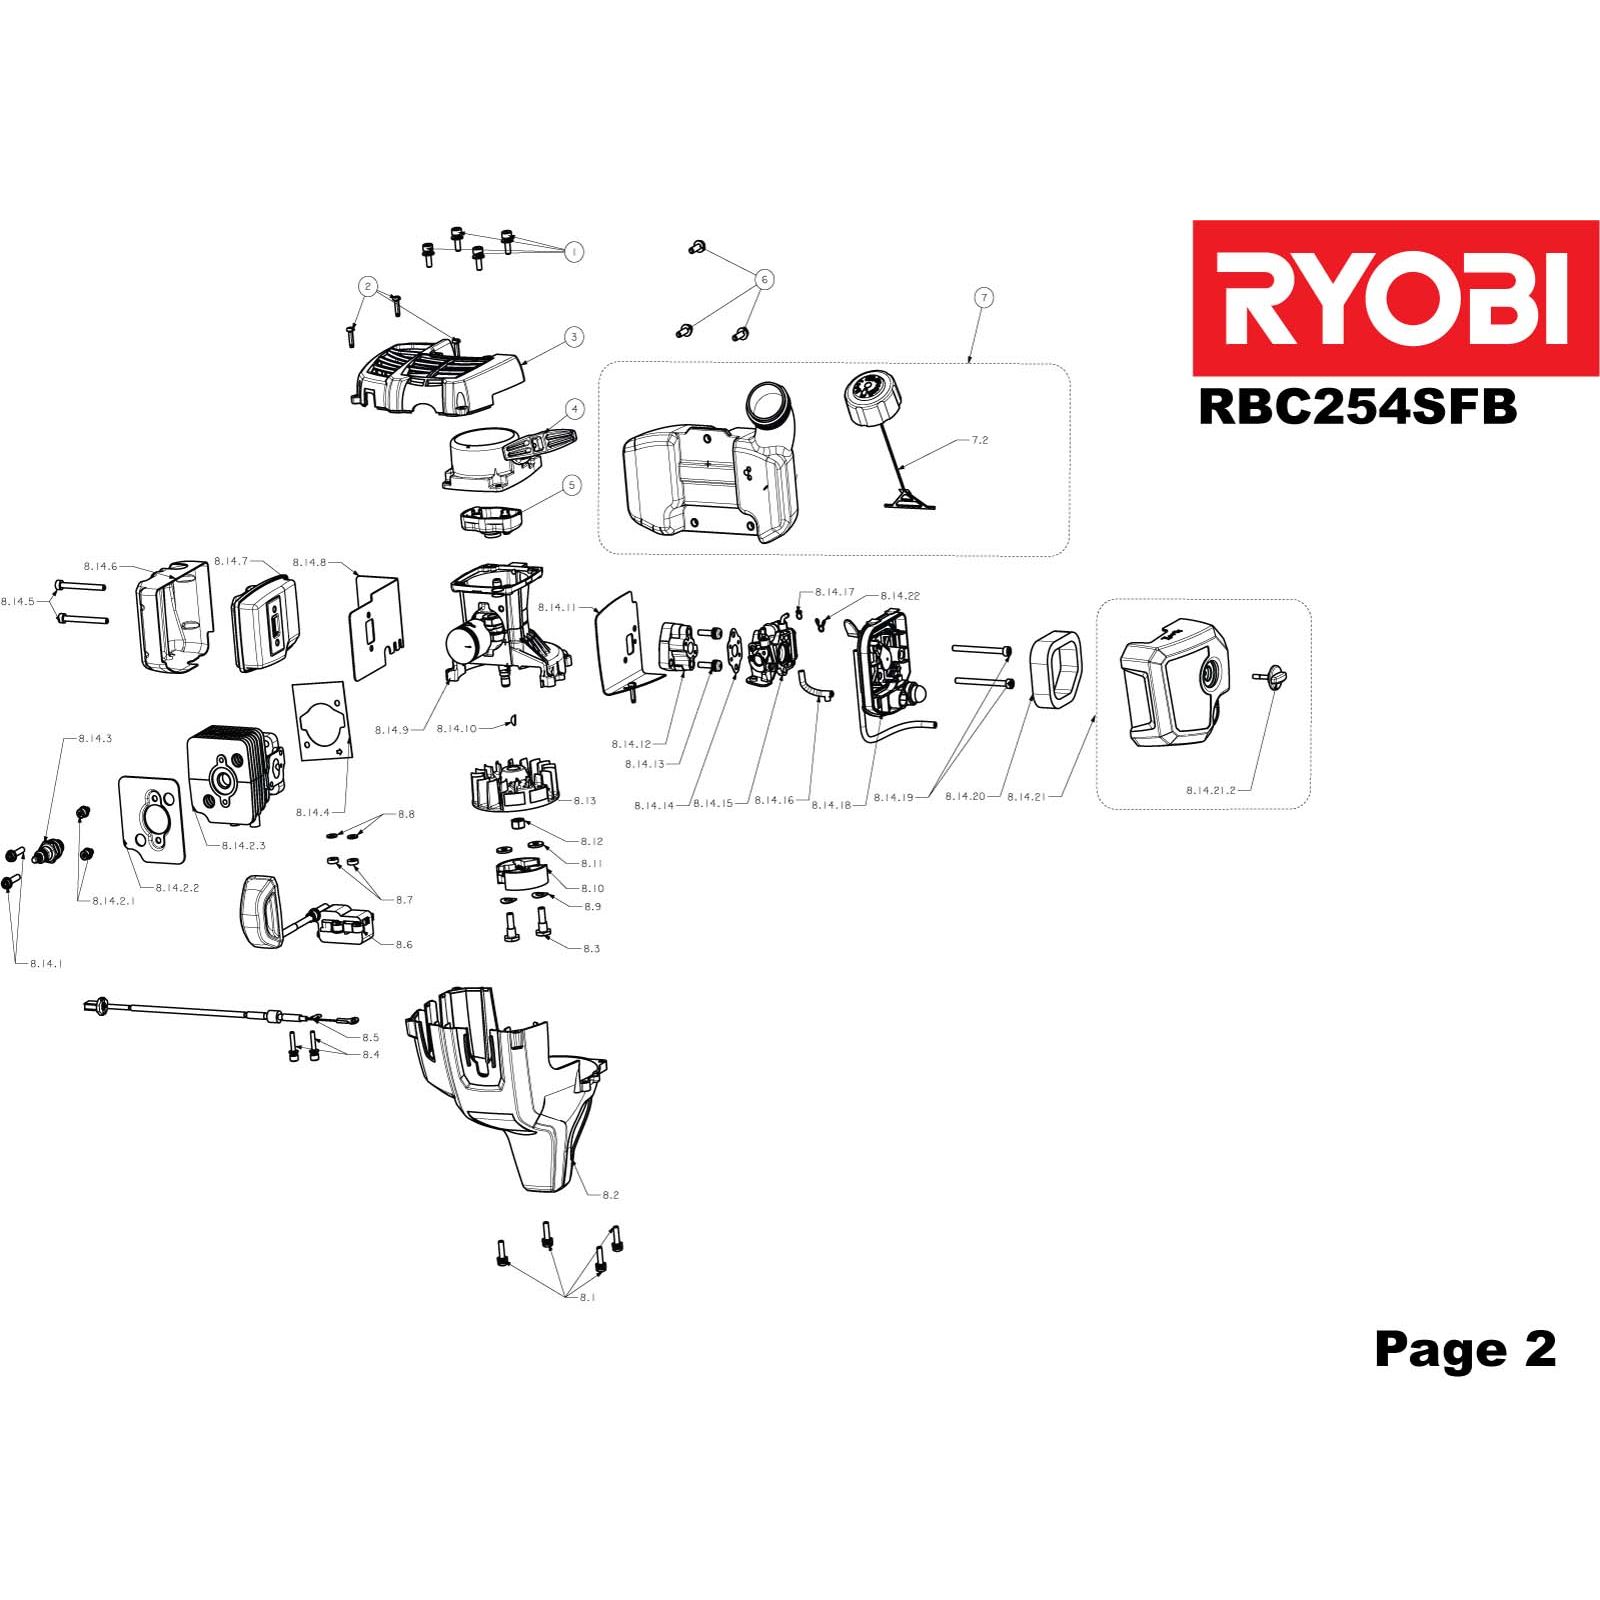 Buy A Ryobi Rbc254fsb Spare Part Or Replacement Part For Your 25cc